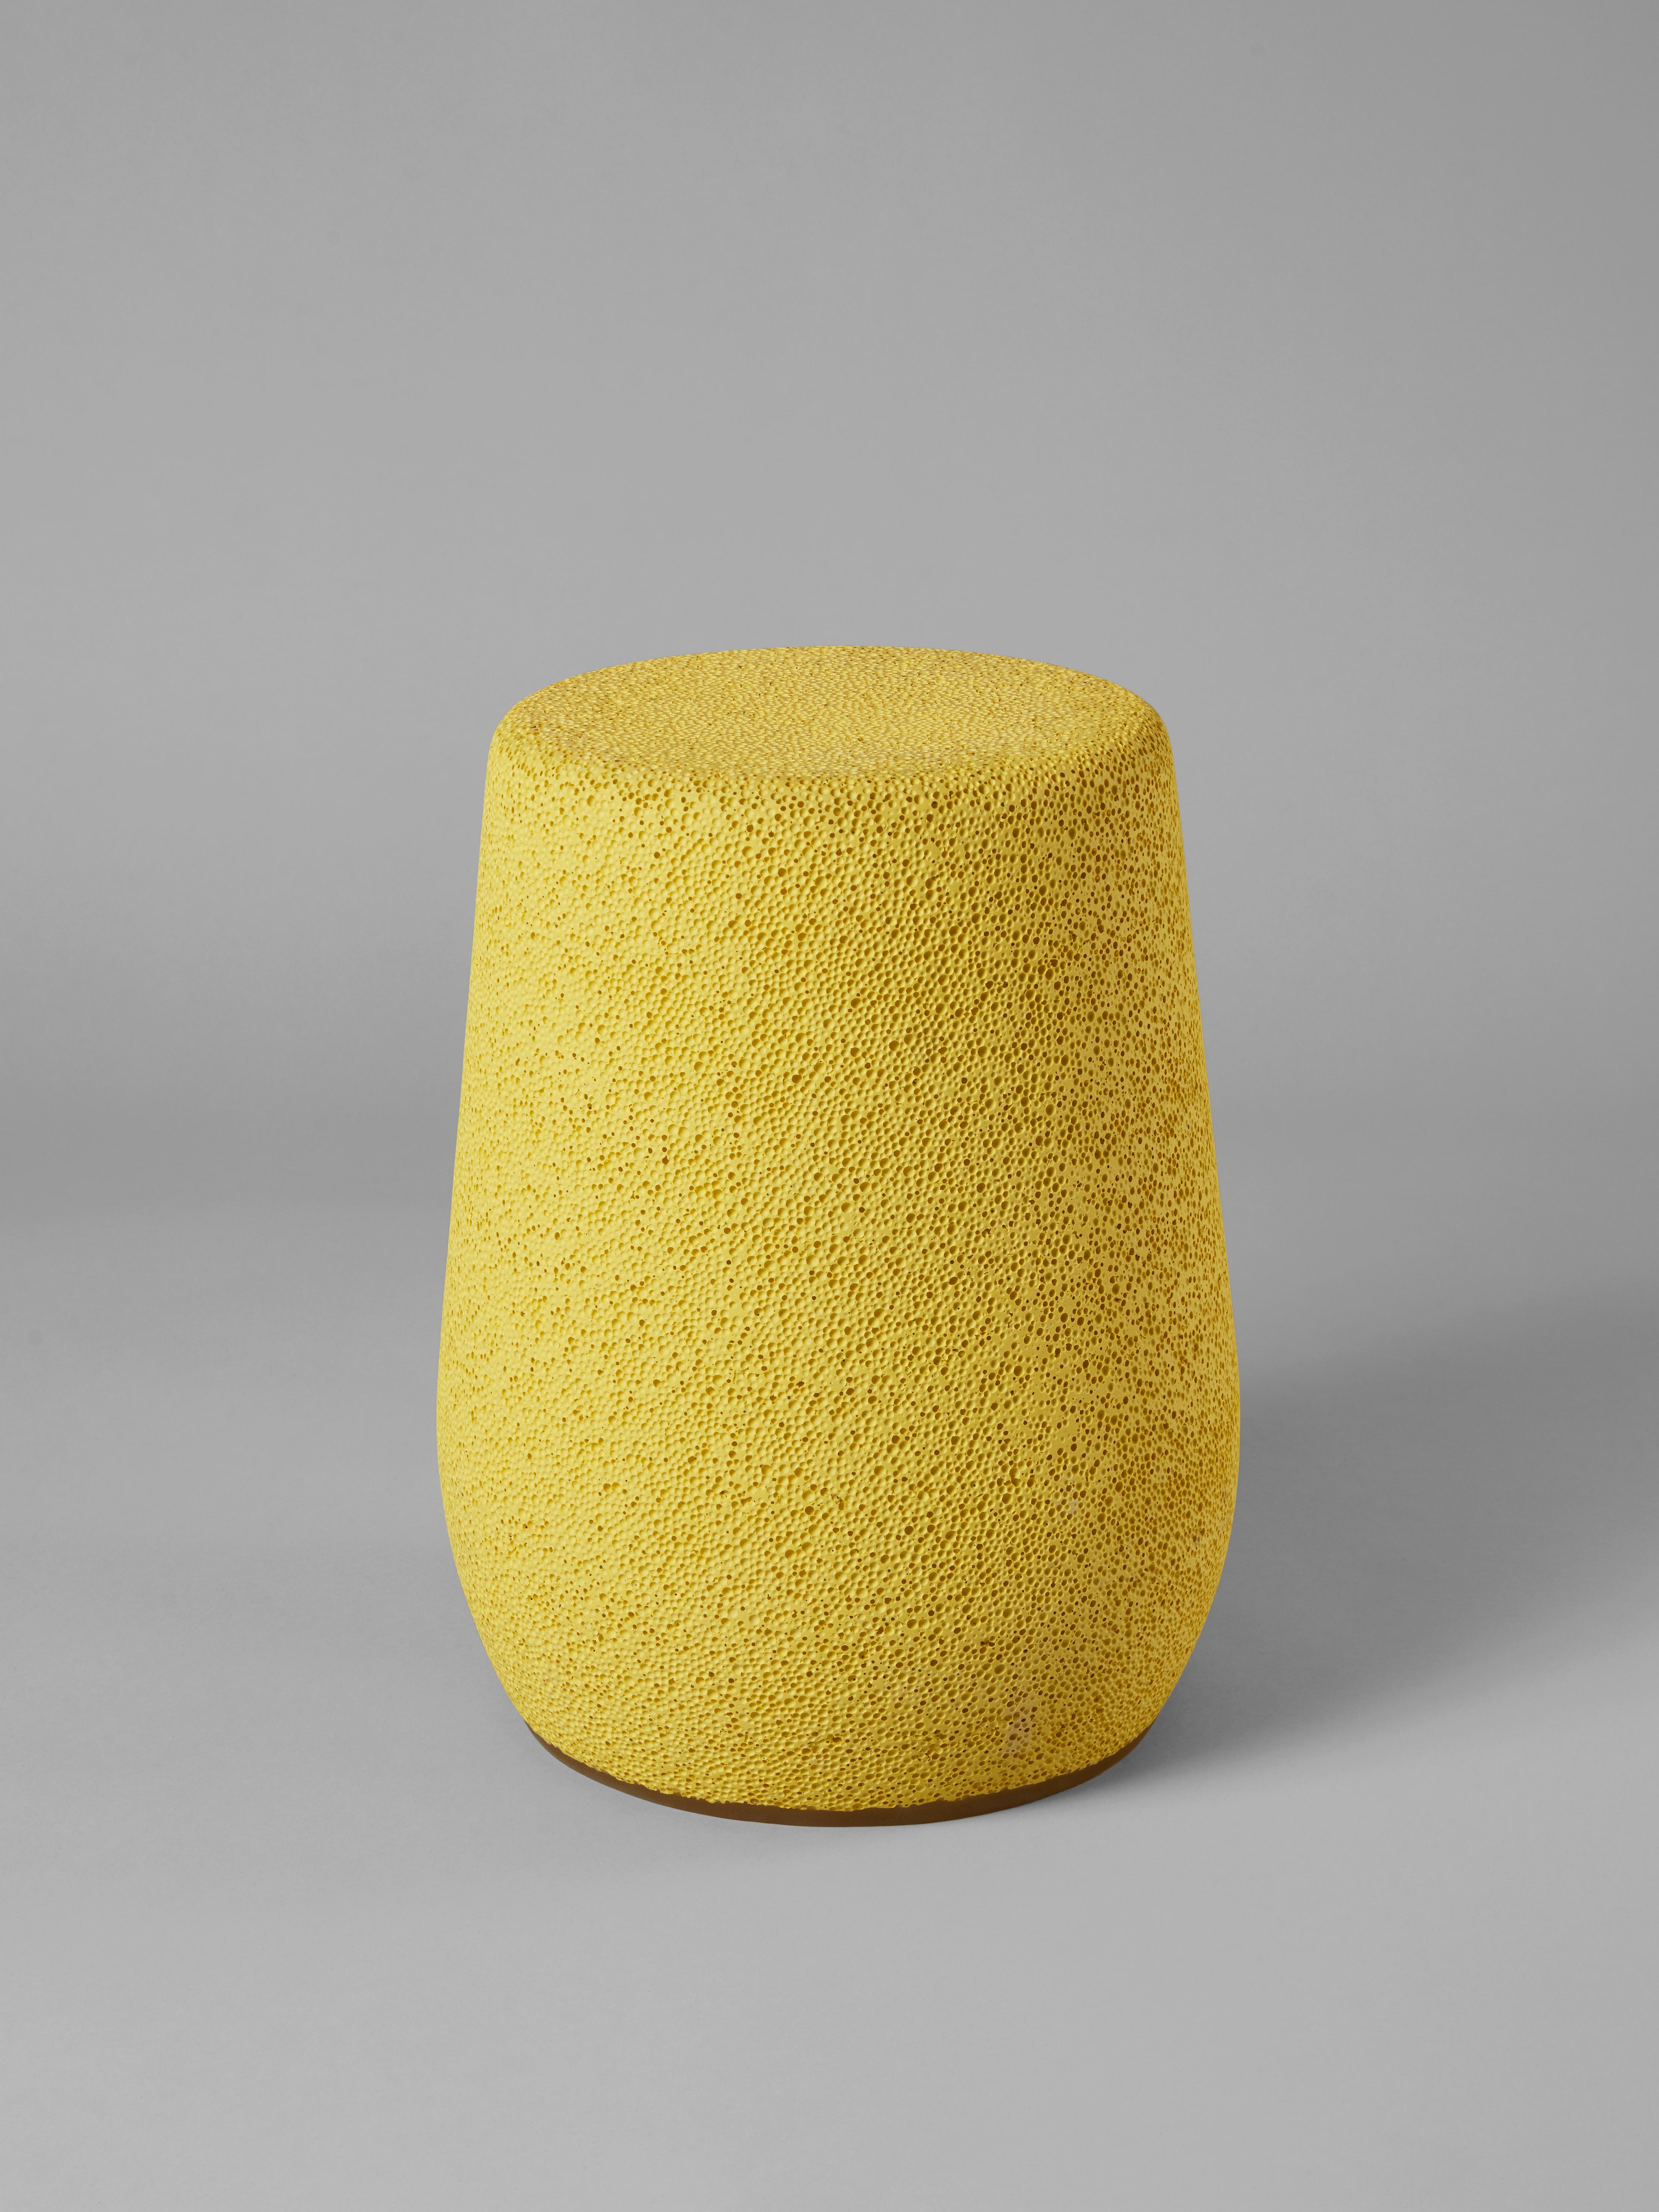 Evoking a beehive or or an intriguing mineral like pumice stone, this ‘Lightweight Porcelain’ stool is part of Djim Berger’s ‘Lightweight Porcelain’ collection exclusively produced for Galerie BSL since 2010. Djim Berger is a graduate of the